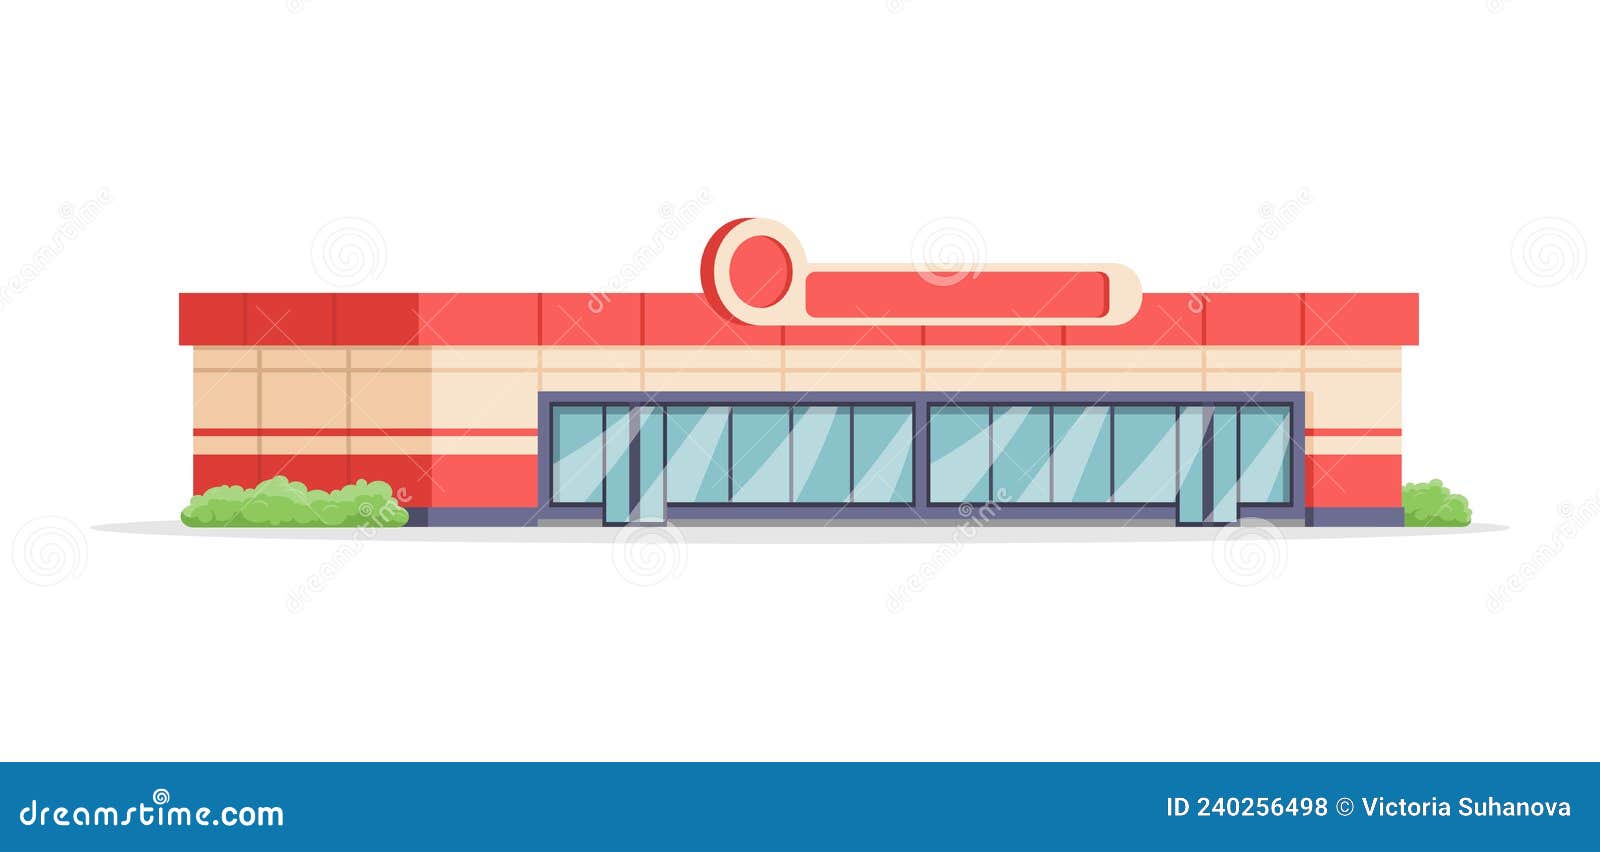 Supermarket Building Exterior with Panoramic Glass Doors and Windows ...